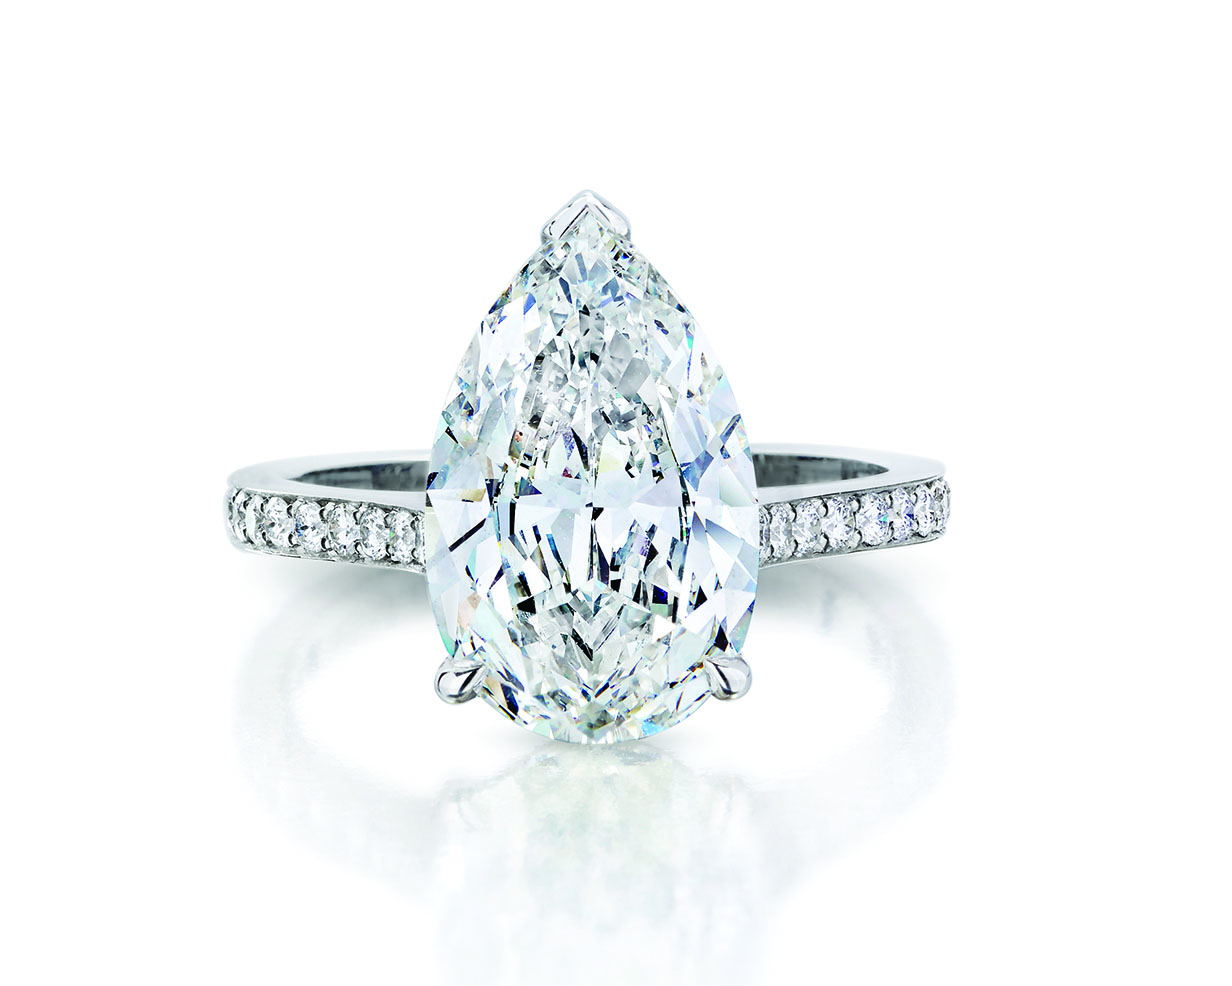 Pear cut diamond engagement ring with platinum pave band